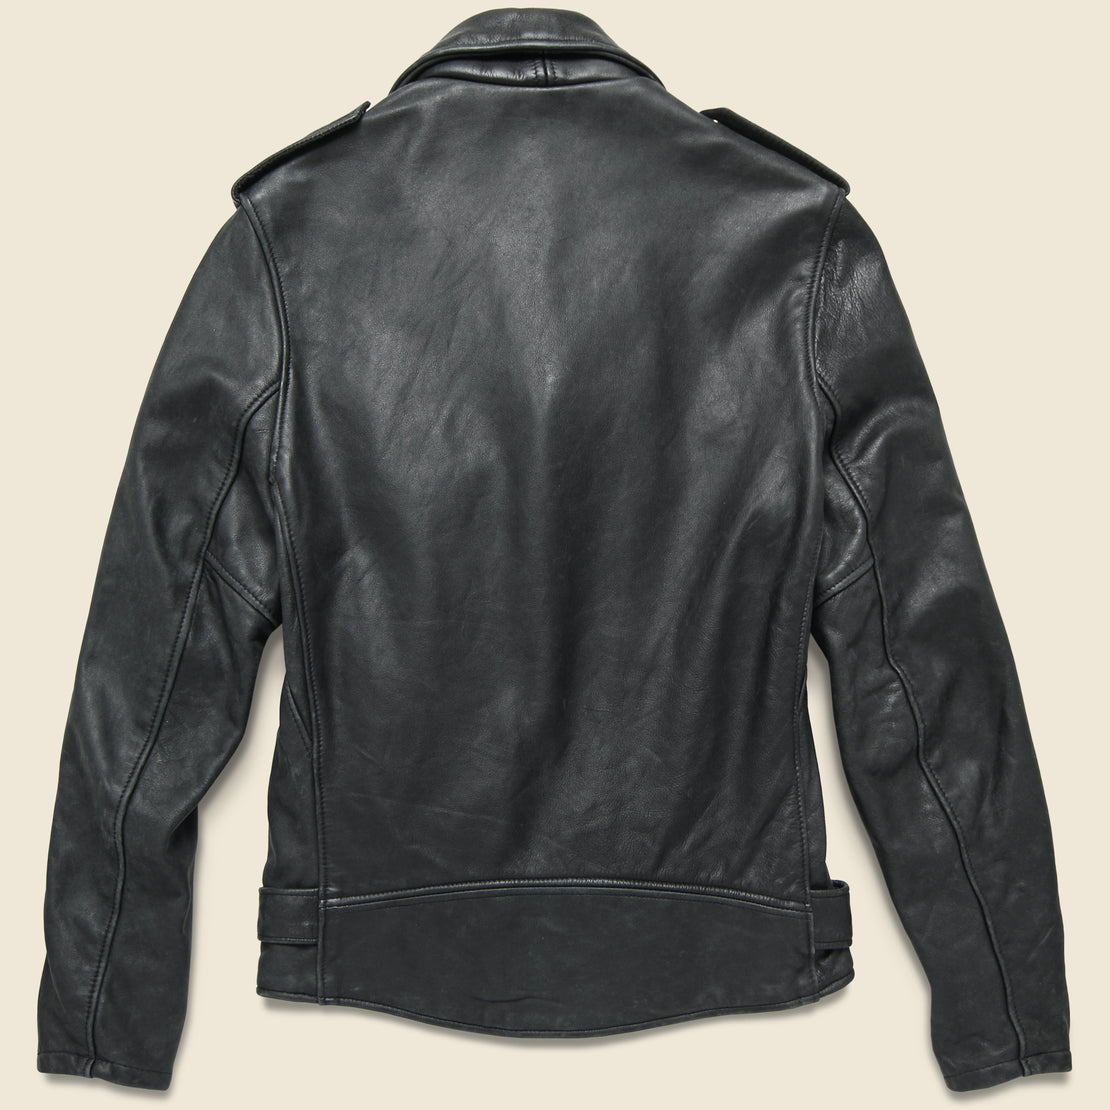 Lightweight Fitted Cowhide Motorcycle Jacket - Black